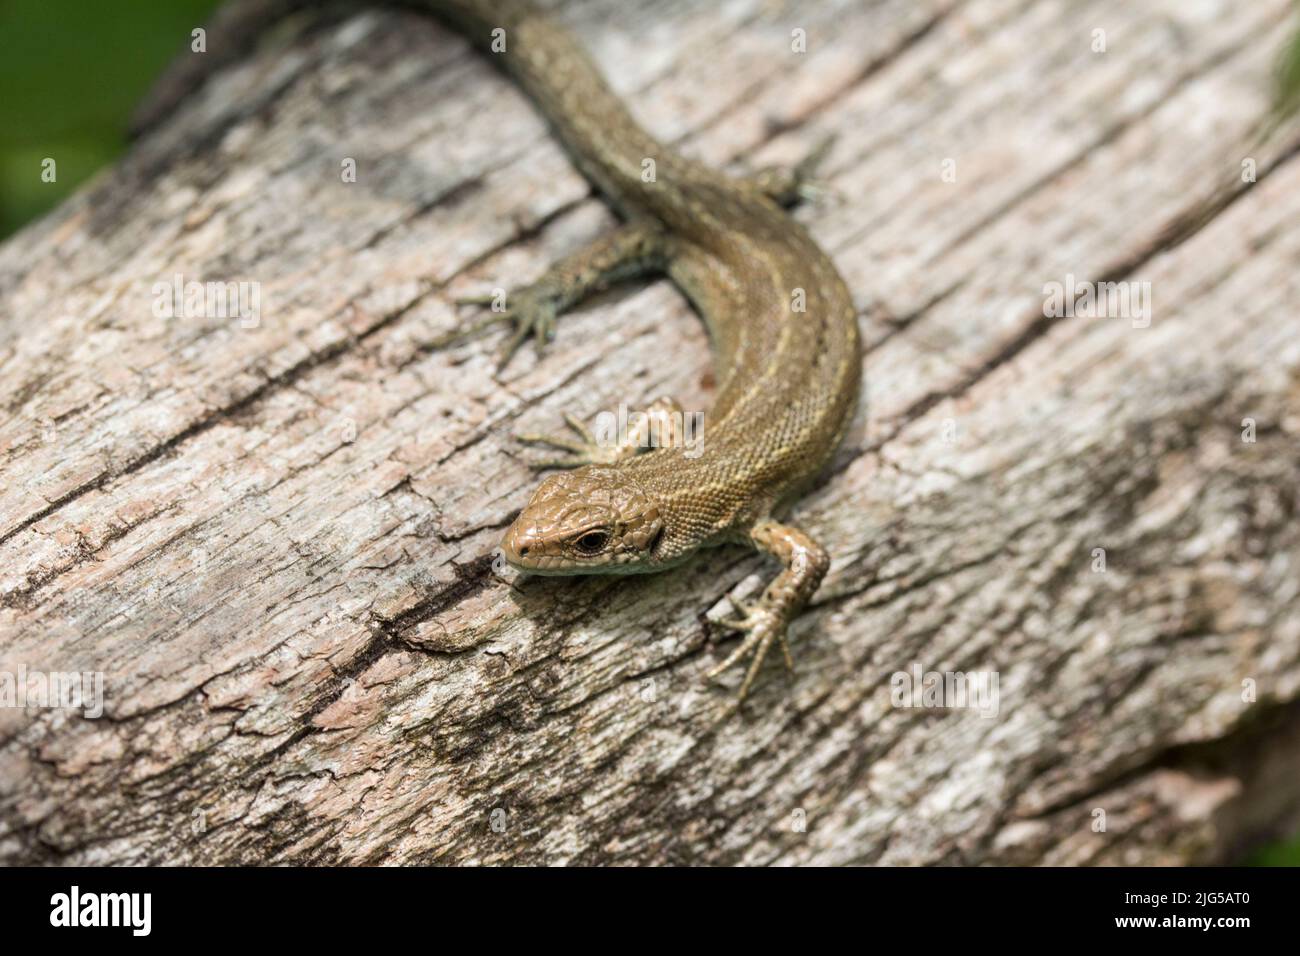 Lizard common (lacerta vivipara) sunbathing on wood, grey brown reptile with a long tail scaly skin, paler underside and throat, and long toes Stock Photo